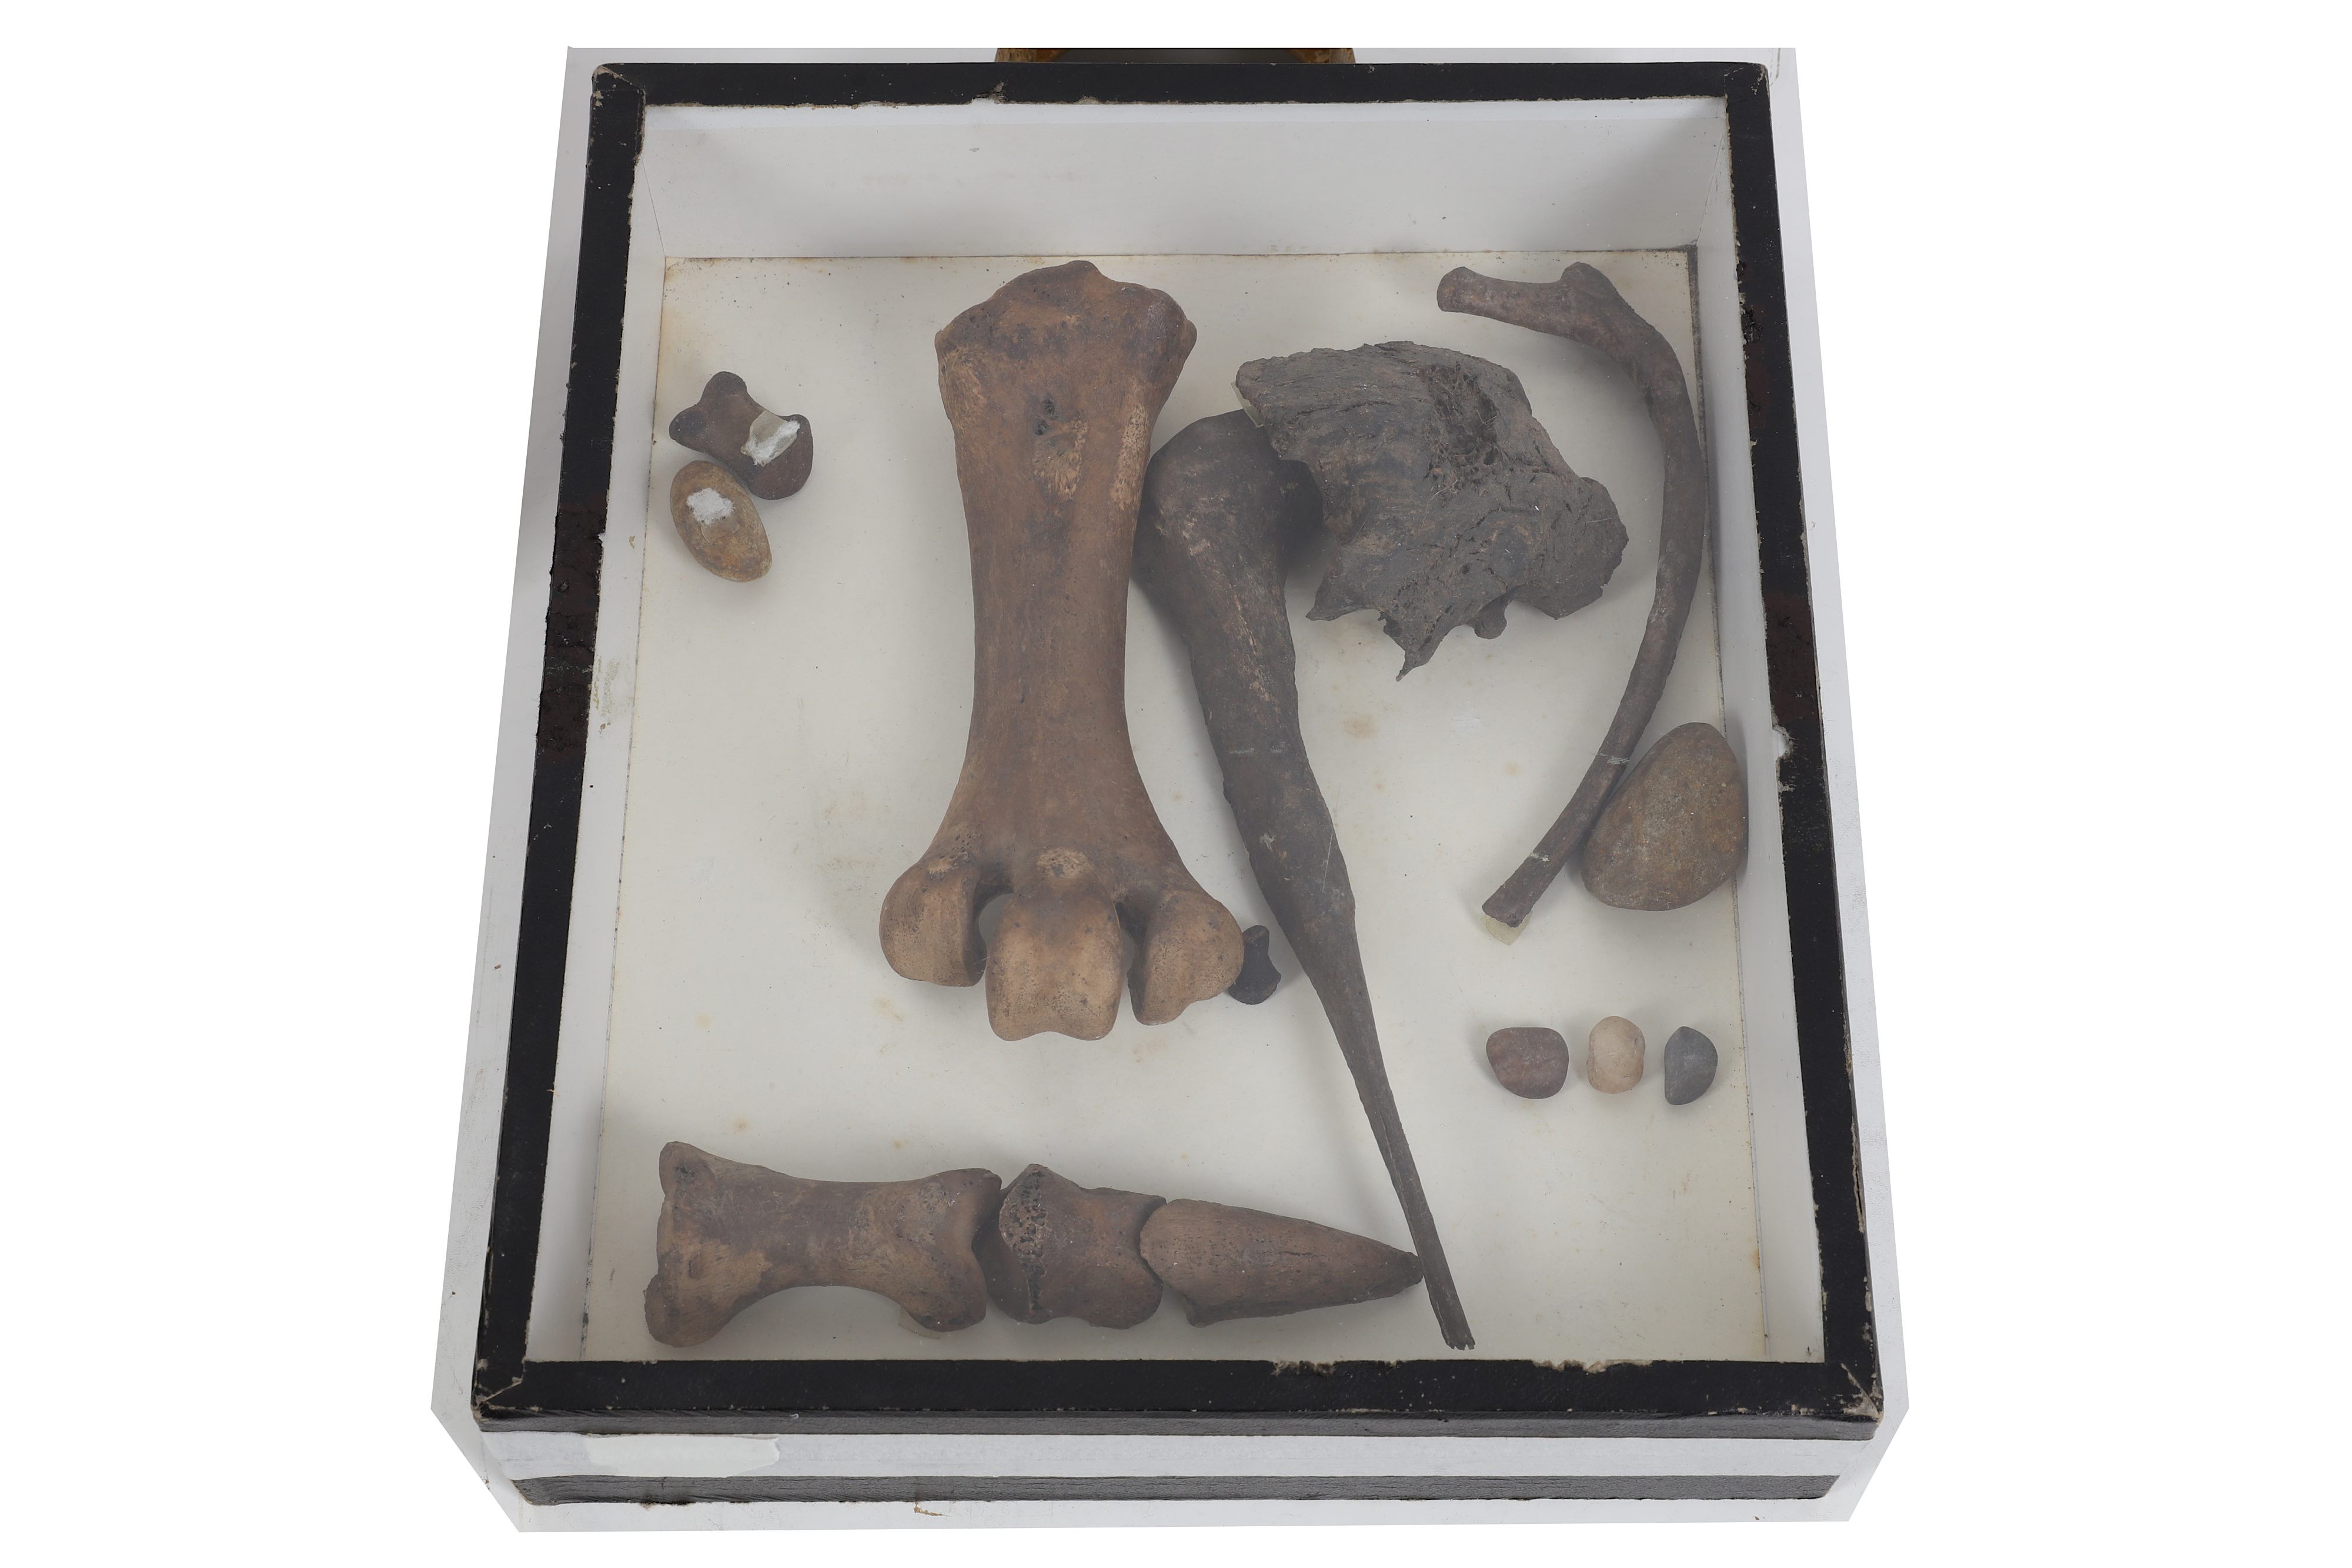 A RARE SELECTION OF BONES FROM THE EXTINCT MOA BIRD, EX-MUSEUM - Image 3 of 3